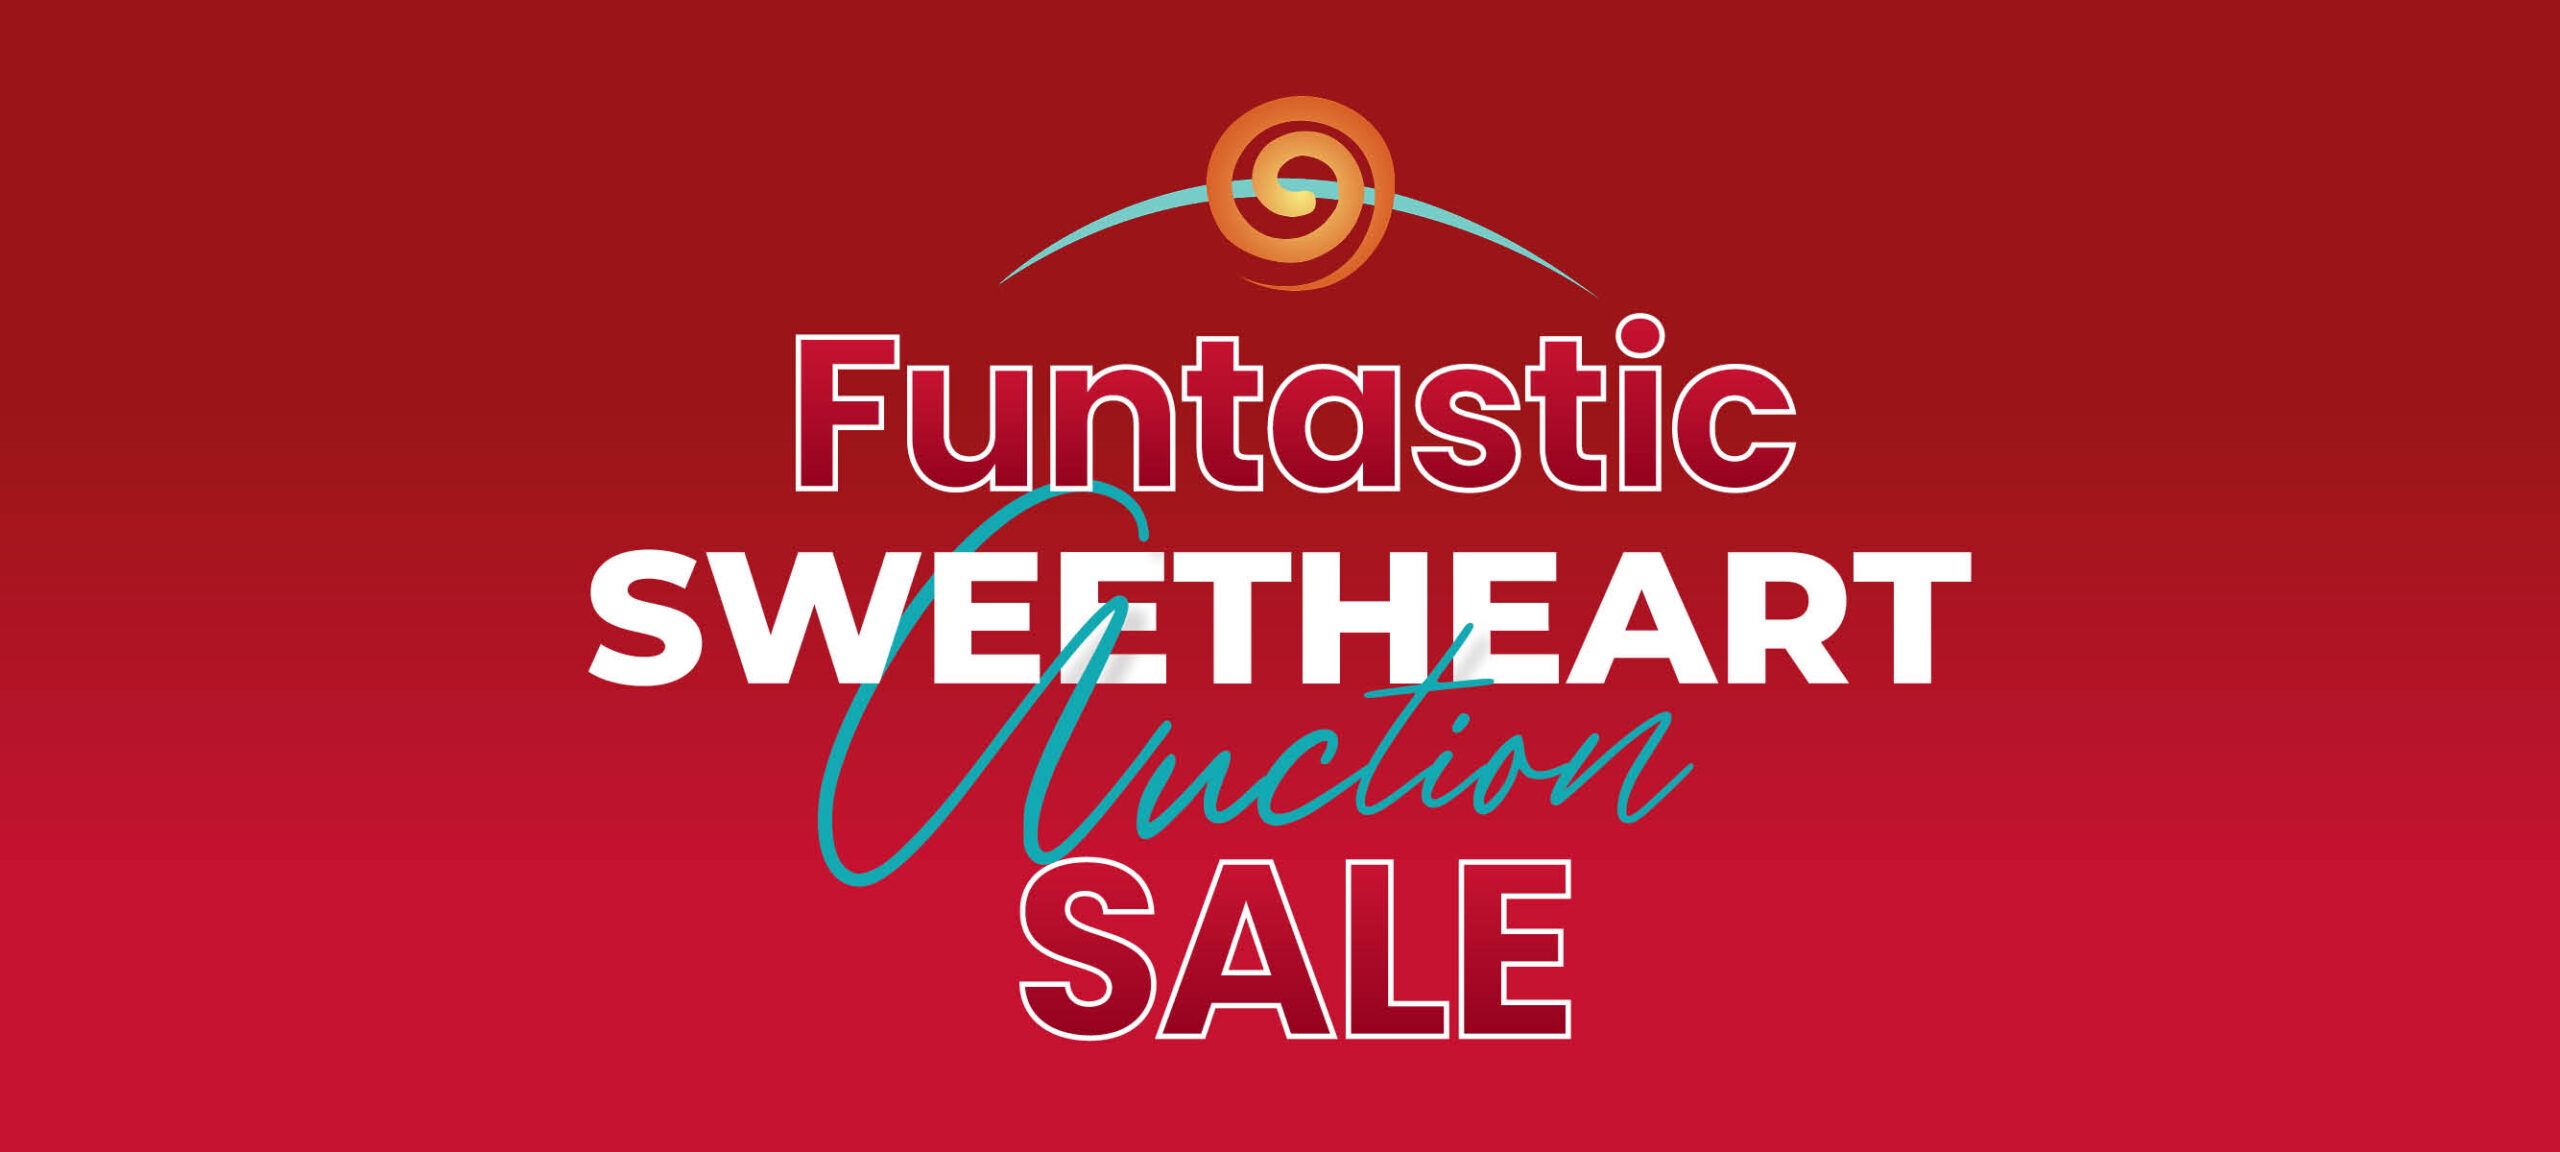 Funtastic Sweetheart Auction Sale